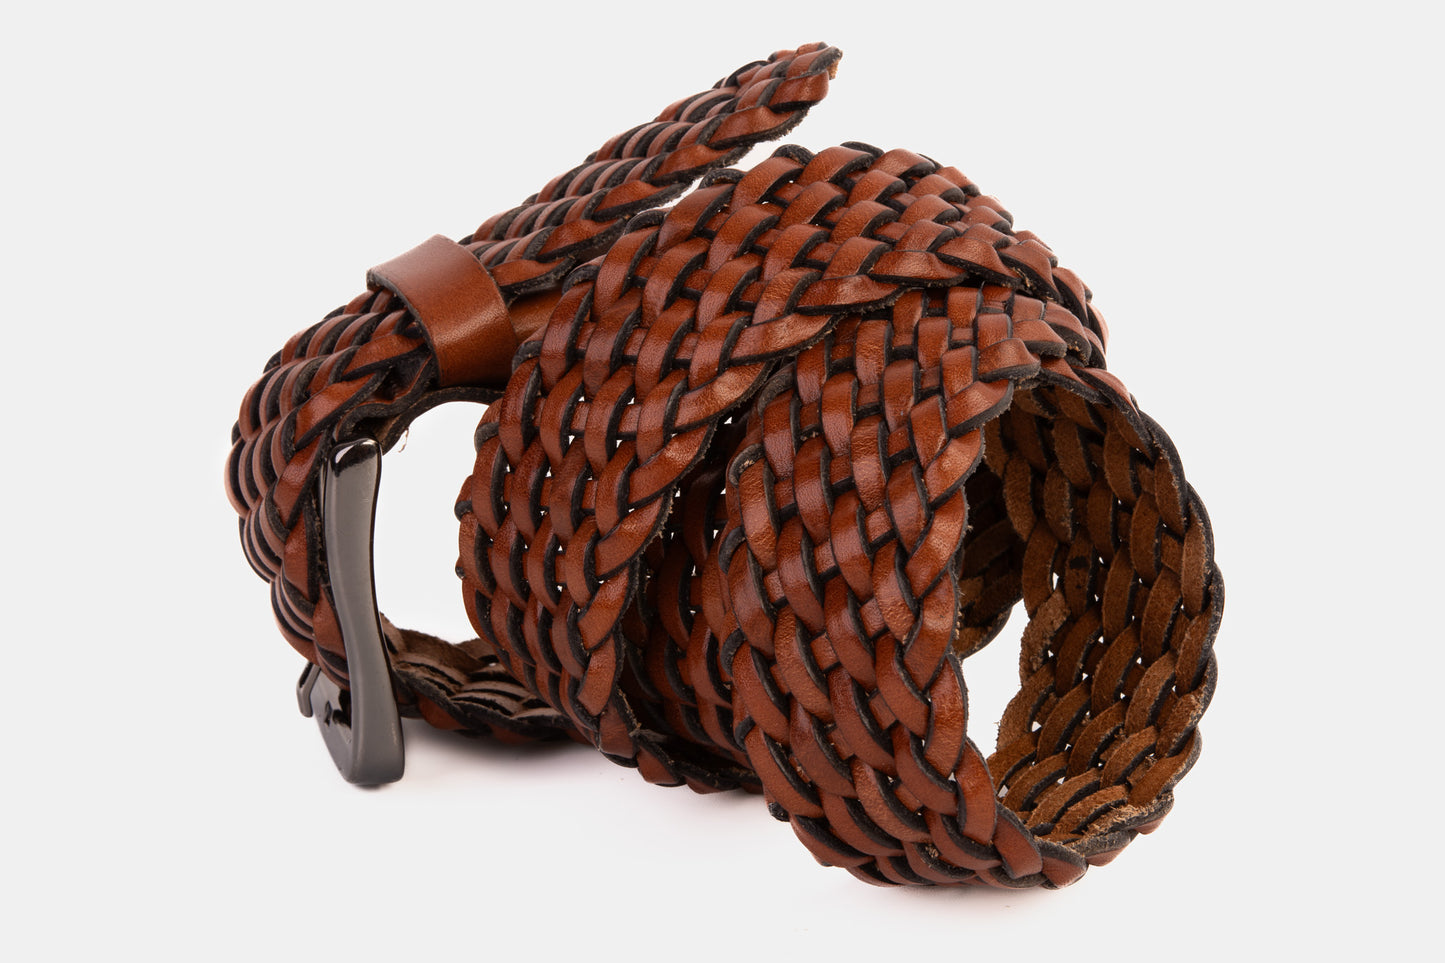 The Grand Woven Tan Color Leather Belt